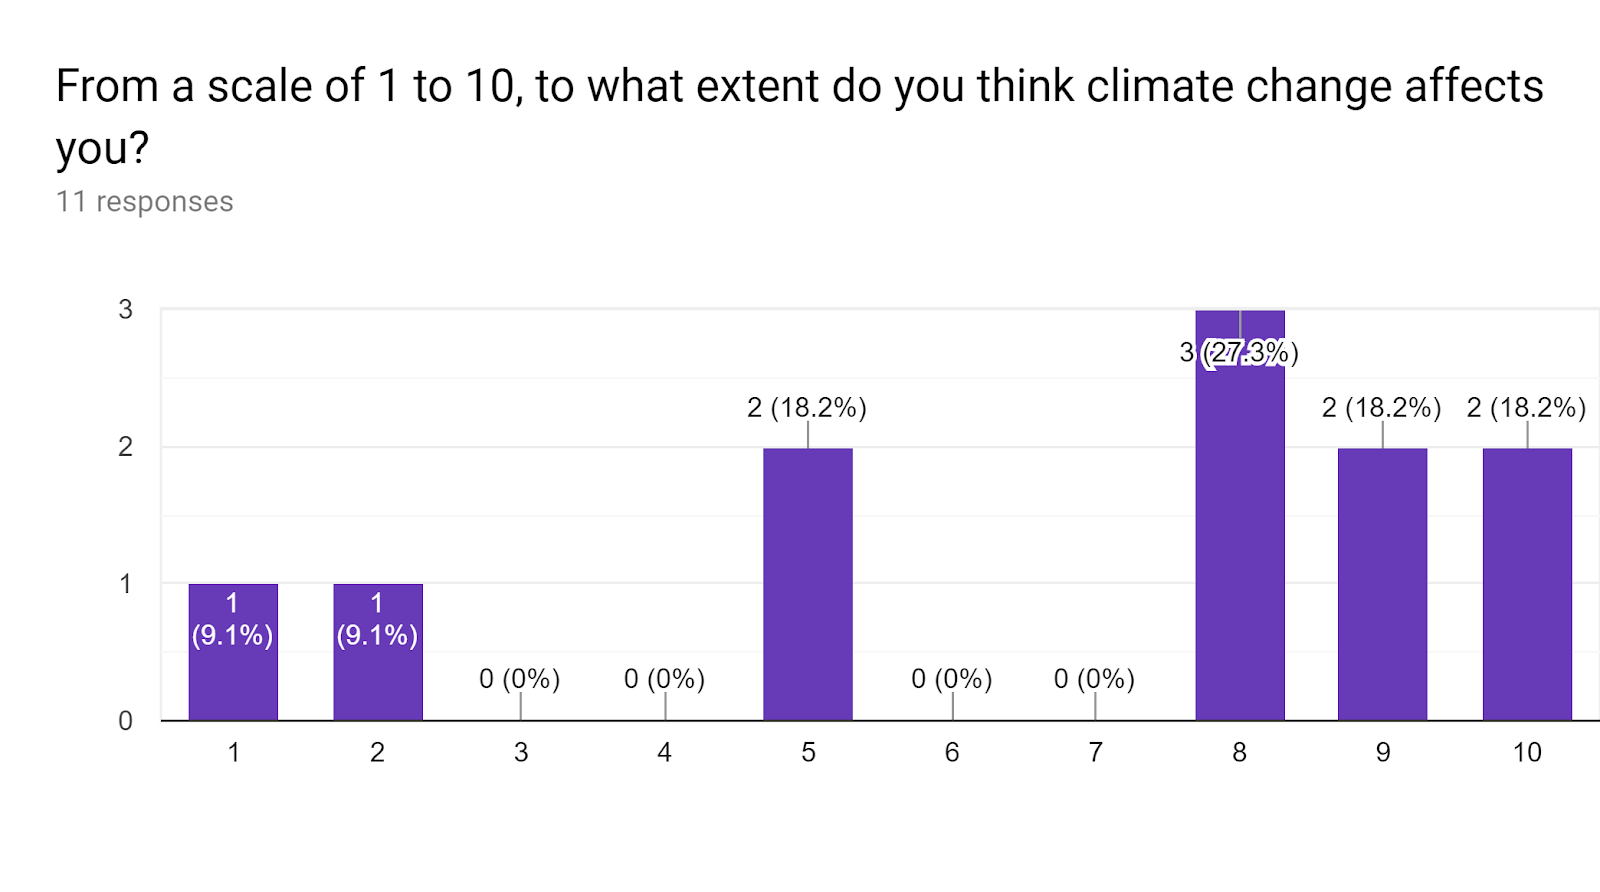 Forms response chart. Question title: From a scale of 1 to 10, to what extent do you think climate change affects you?. Number of responses: 11 responses.